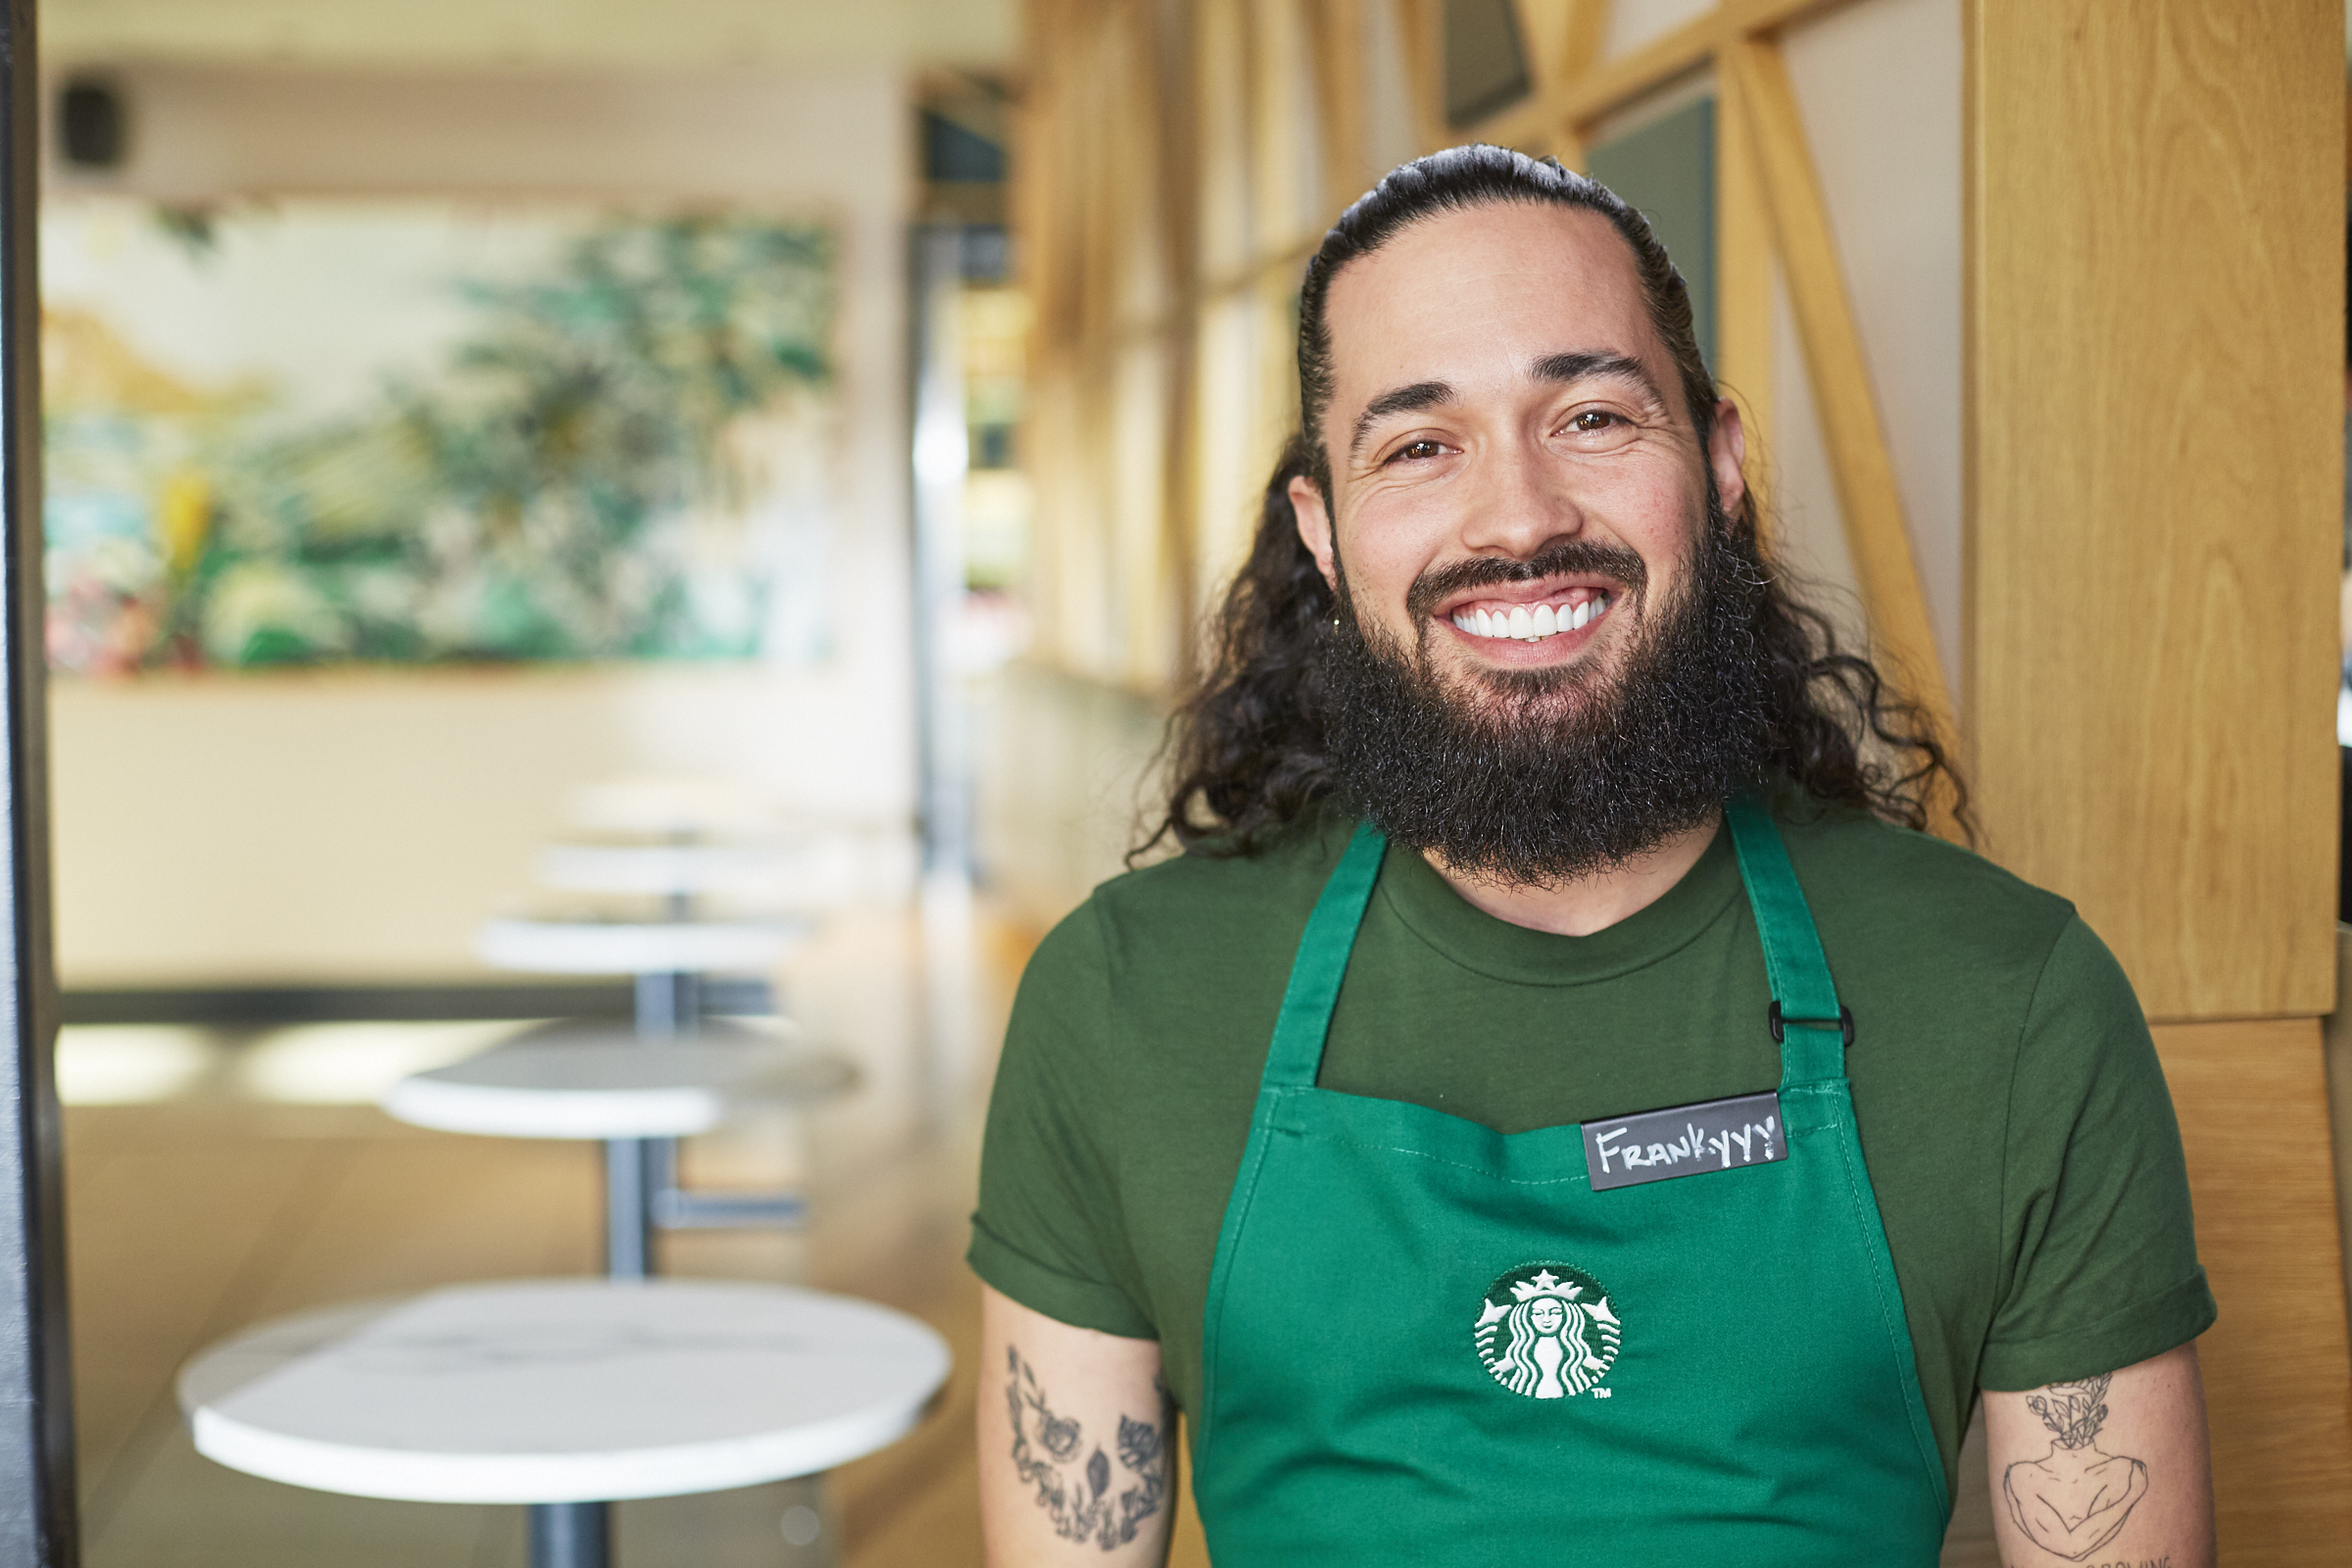 A person wearing a Starbucks green apron smiles directly into the camera.